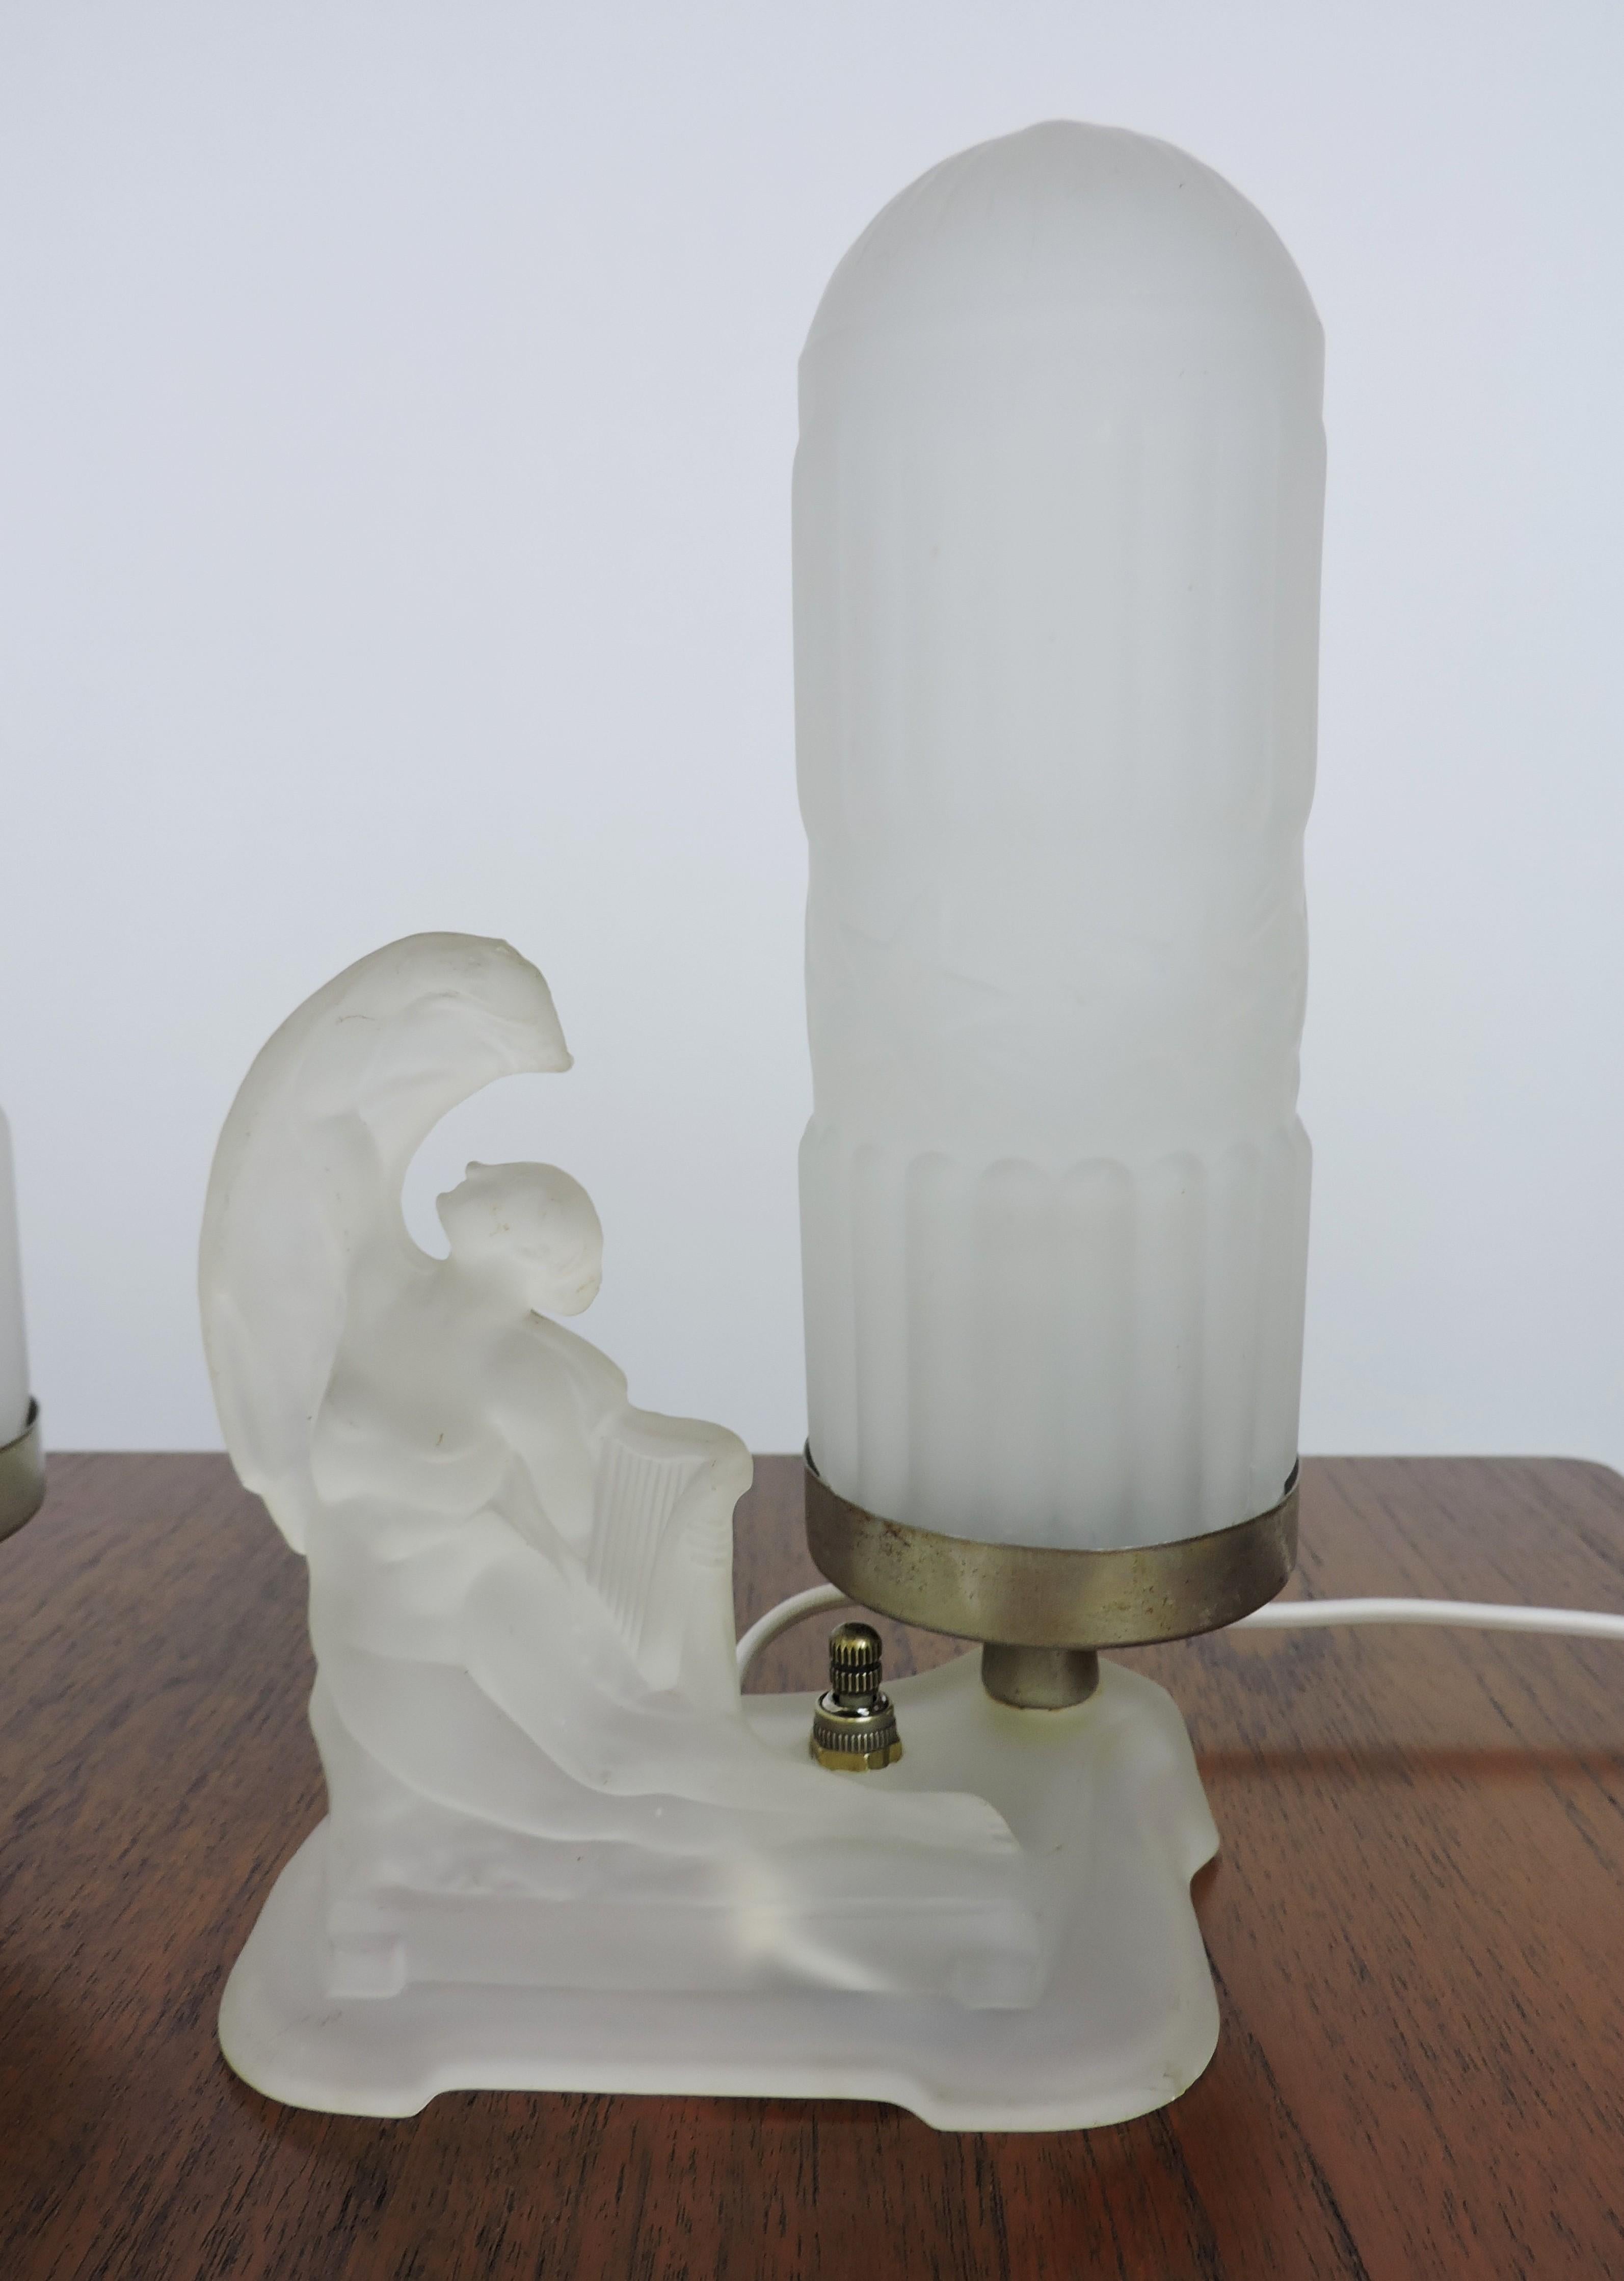 Pair of Art Deco Frosted Glass Figural Boudoir Lamps Attributed to McKee  In Good Condition For Sale In Chesterfield, NJ